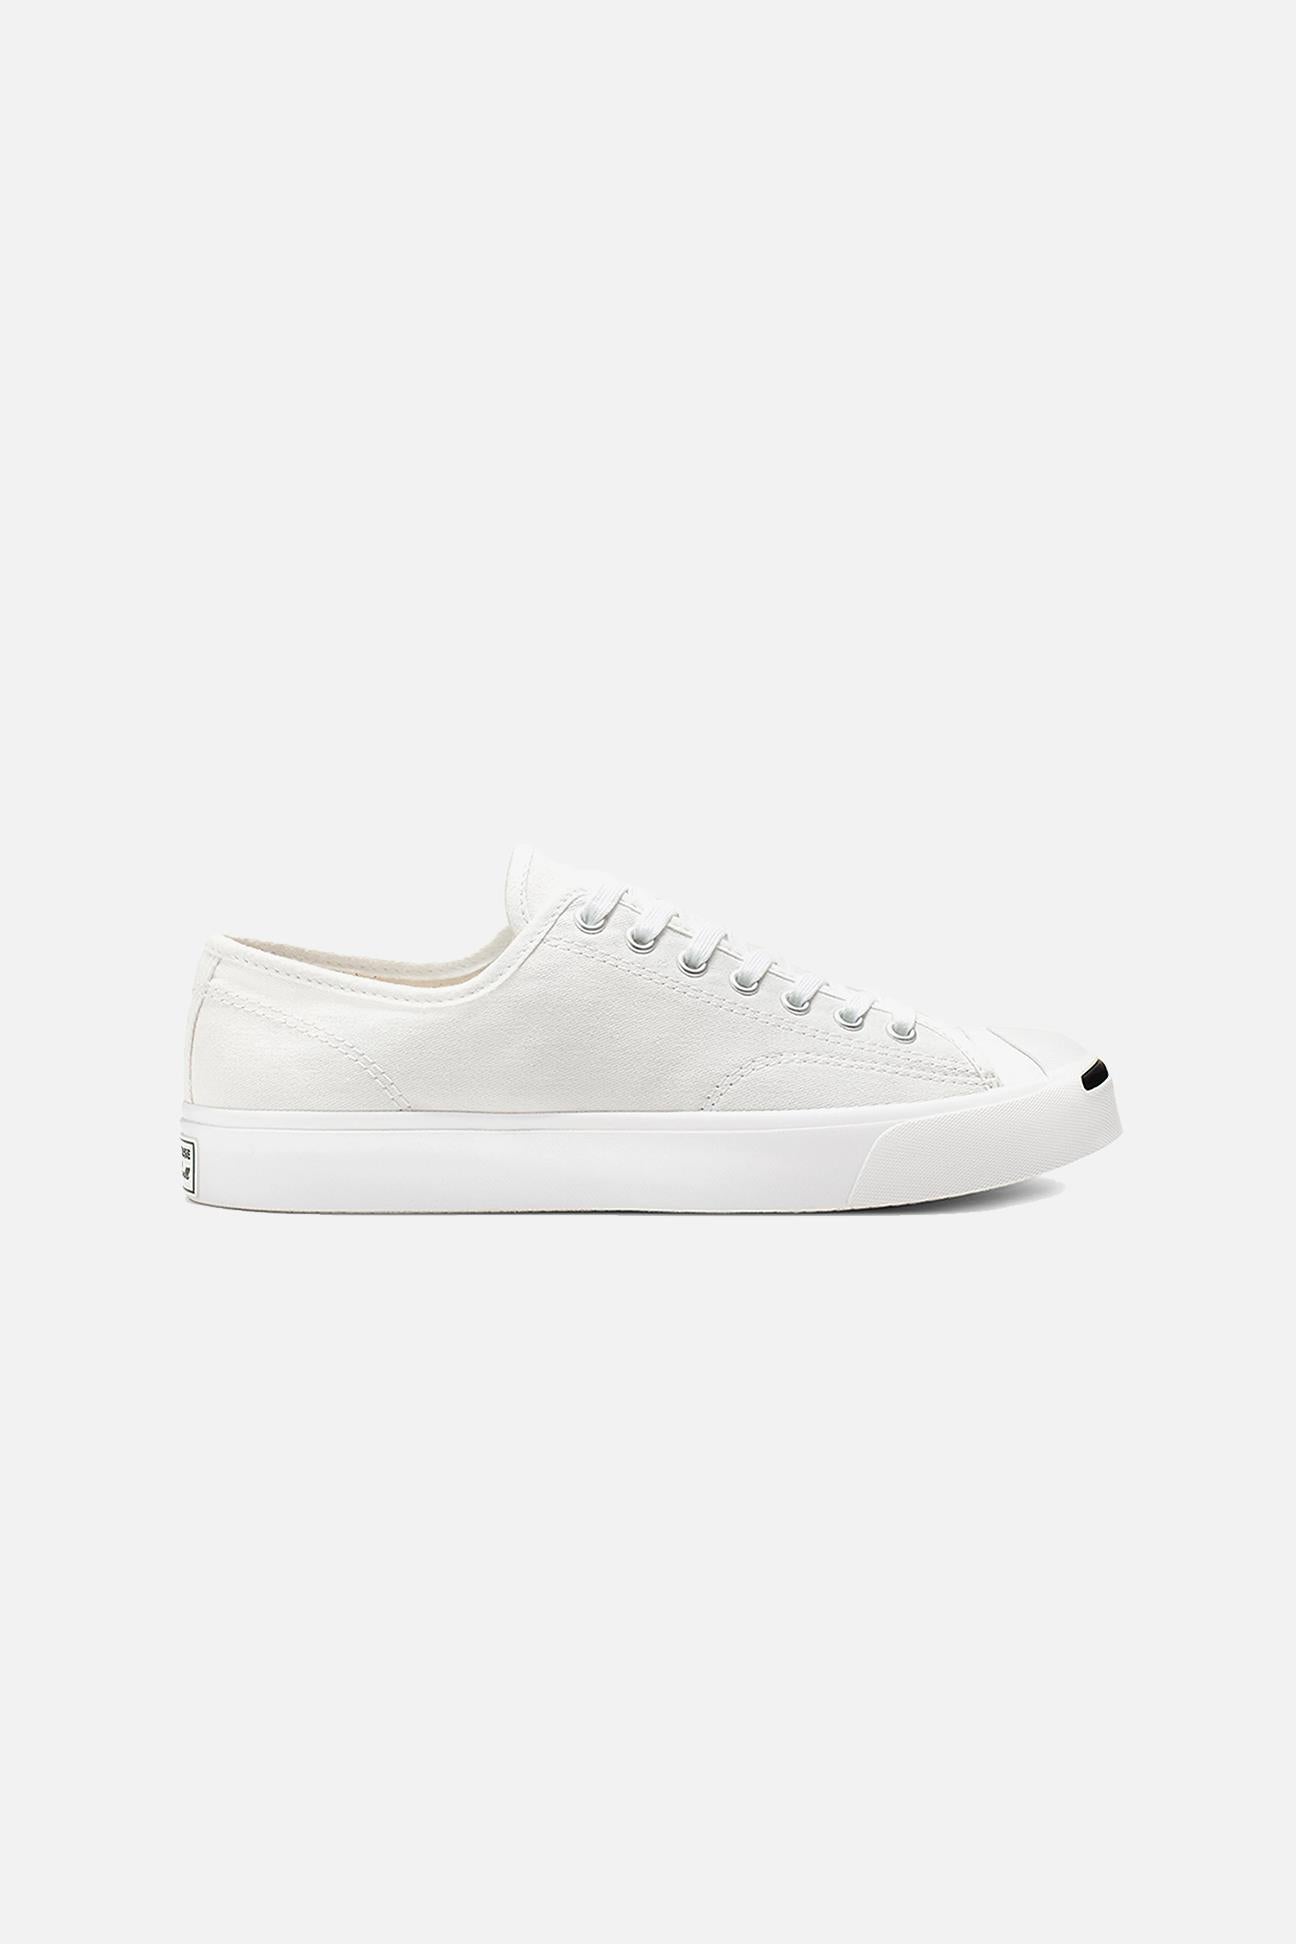 JACK PURCELL CANVAS 